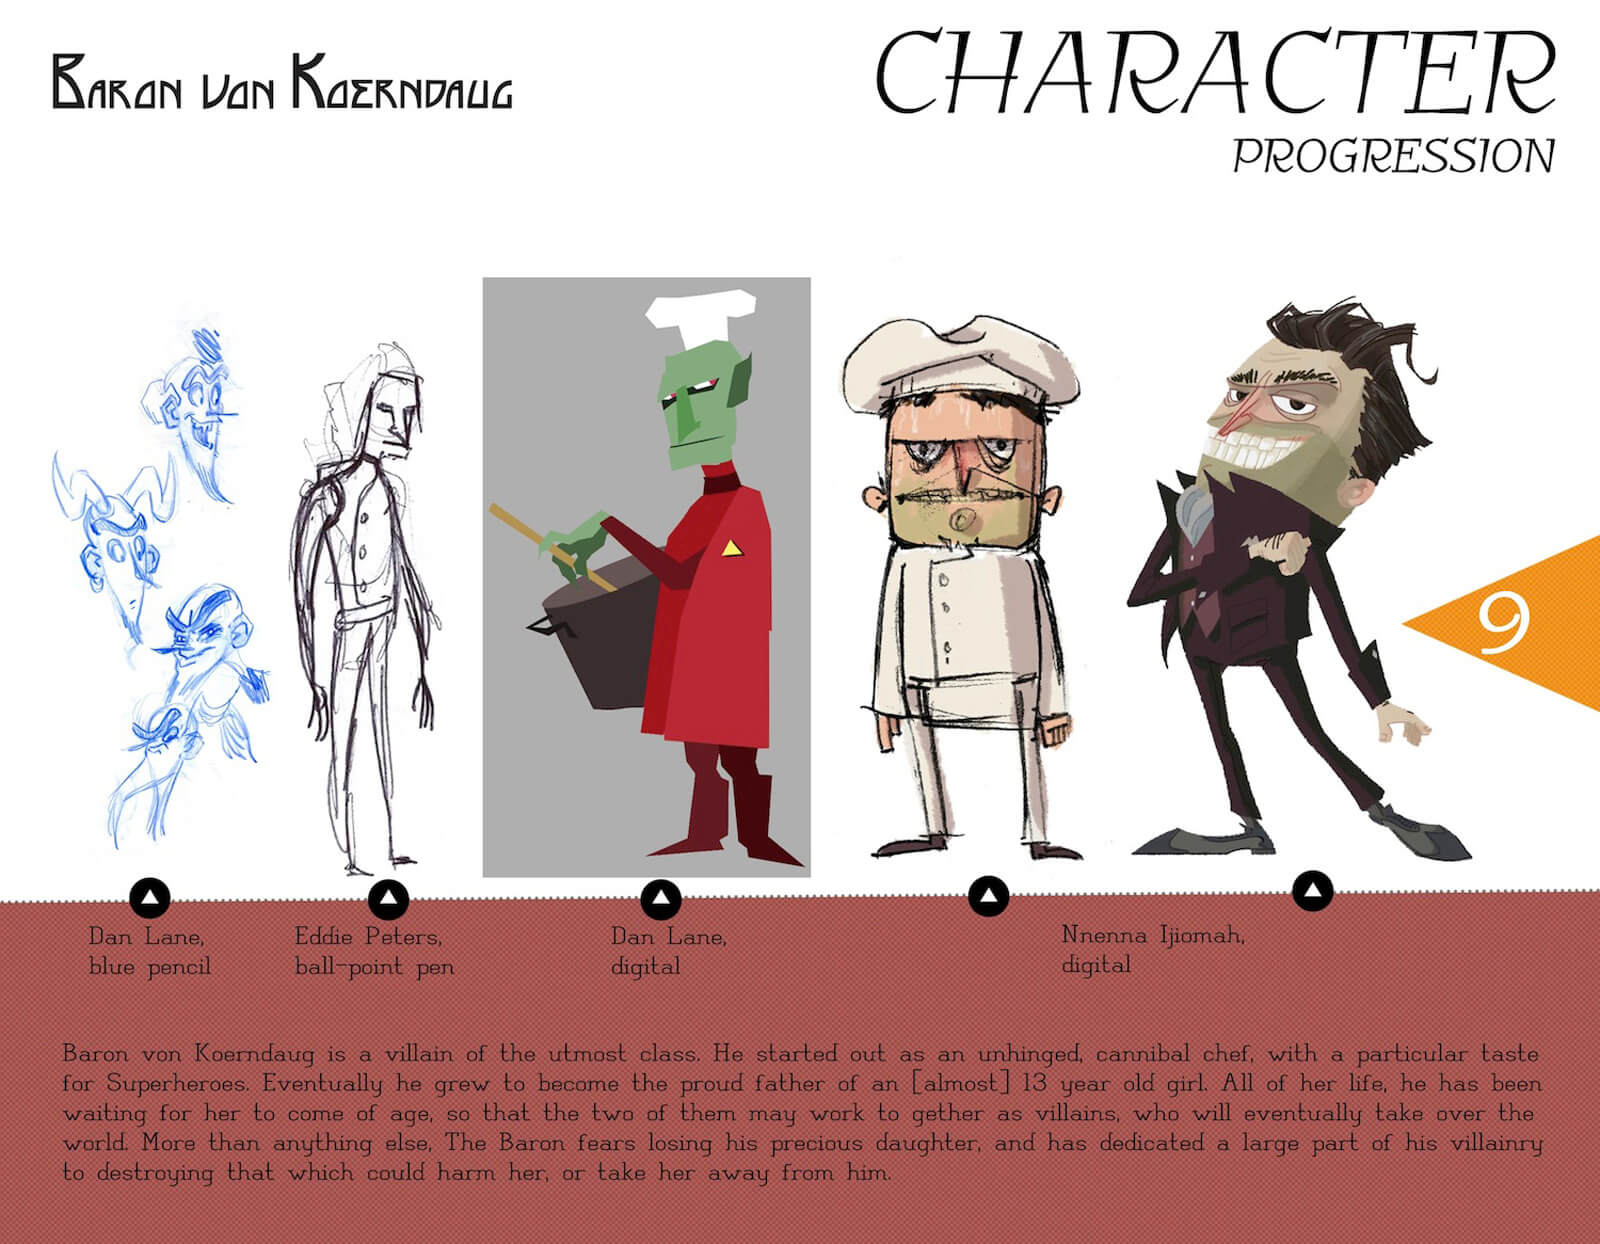 Character progression slide for the character of Baron von Koerndaug, from sketches, to color drawings, to final design